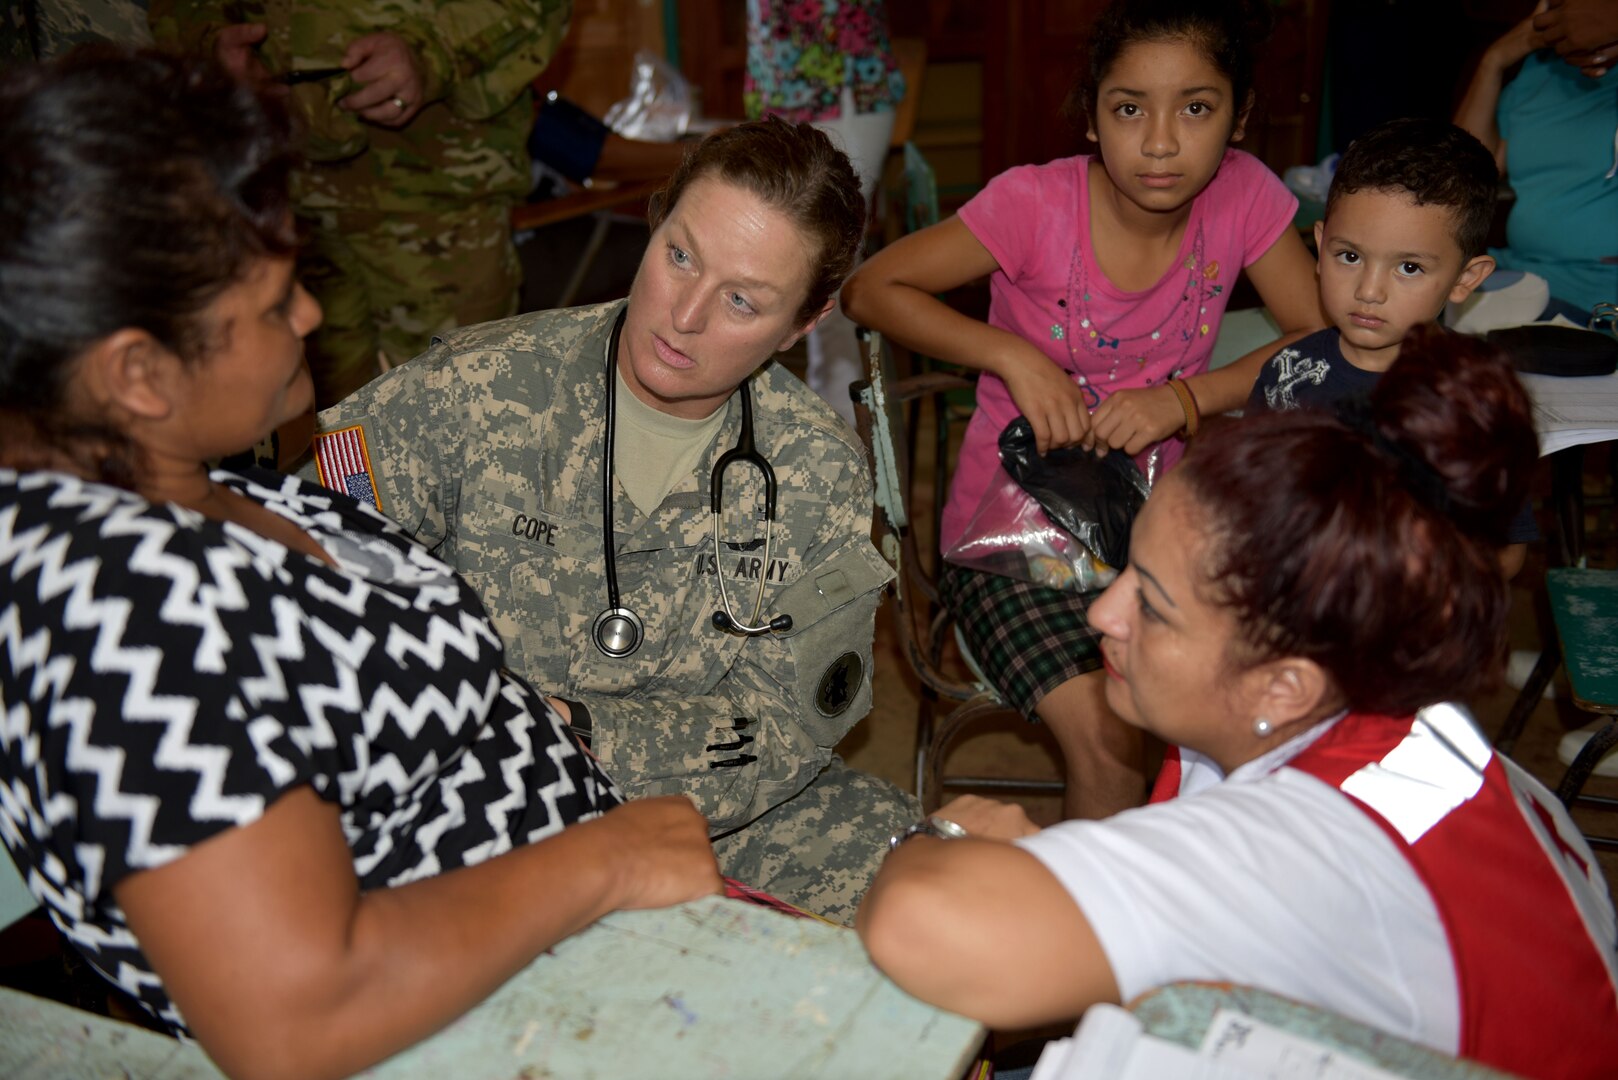 U.S. Army Master Sgt. Nicole Cope, Joint Task Force-Bravo Medical Element, examines a patient during a Medical Readiness Training Exercise in Corinto, Cortes, Feb. 17, 2017. Red Cross volunteers facilitated communication between patients and U.S. medical personnel. (U.S. Army photo by Maria Pinel)